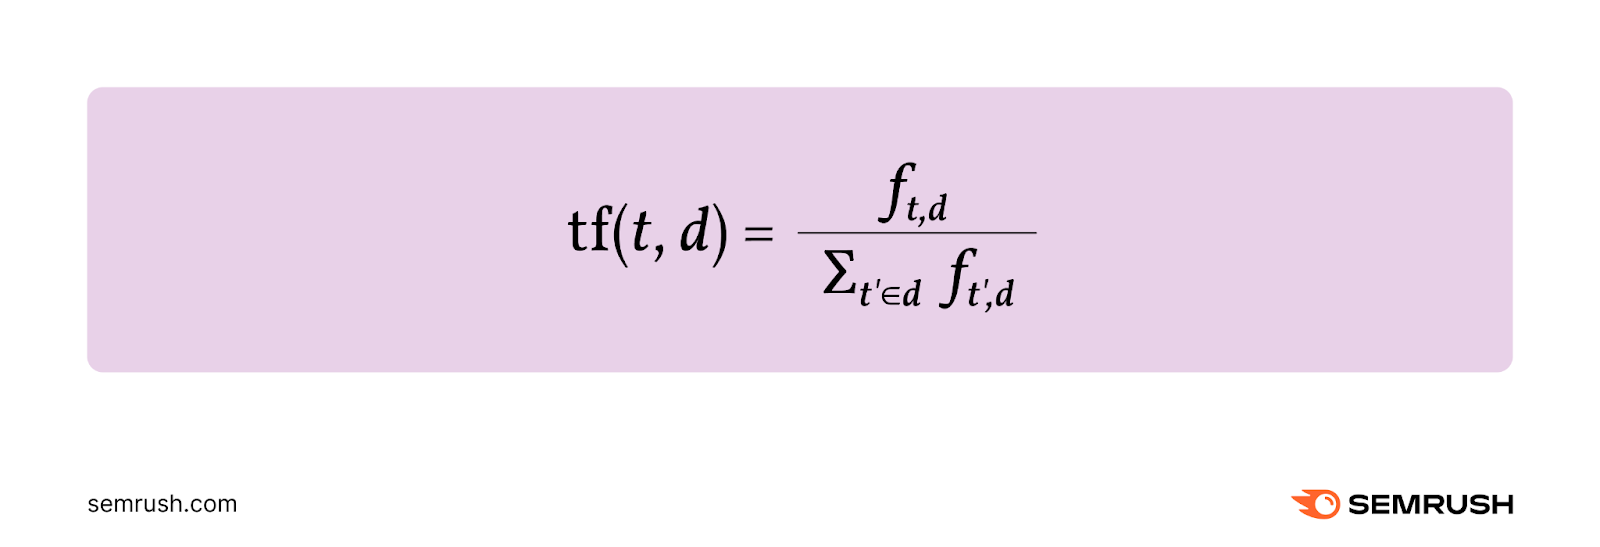 Term frequency (TF) formula